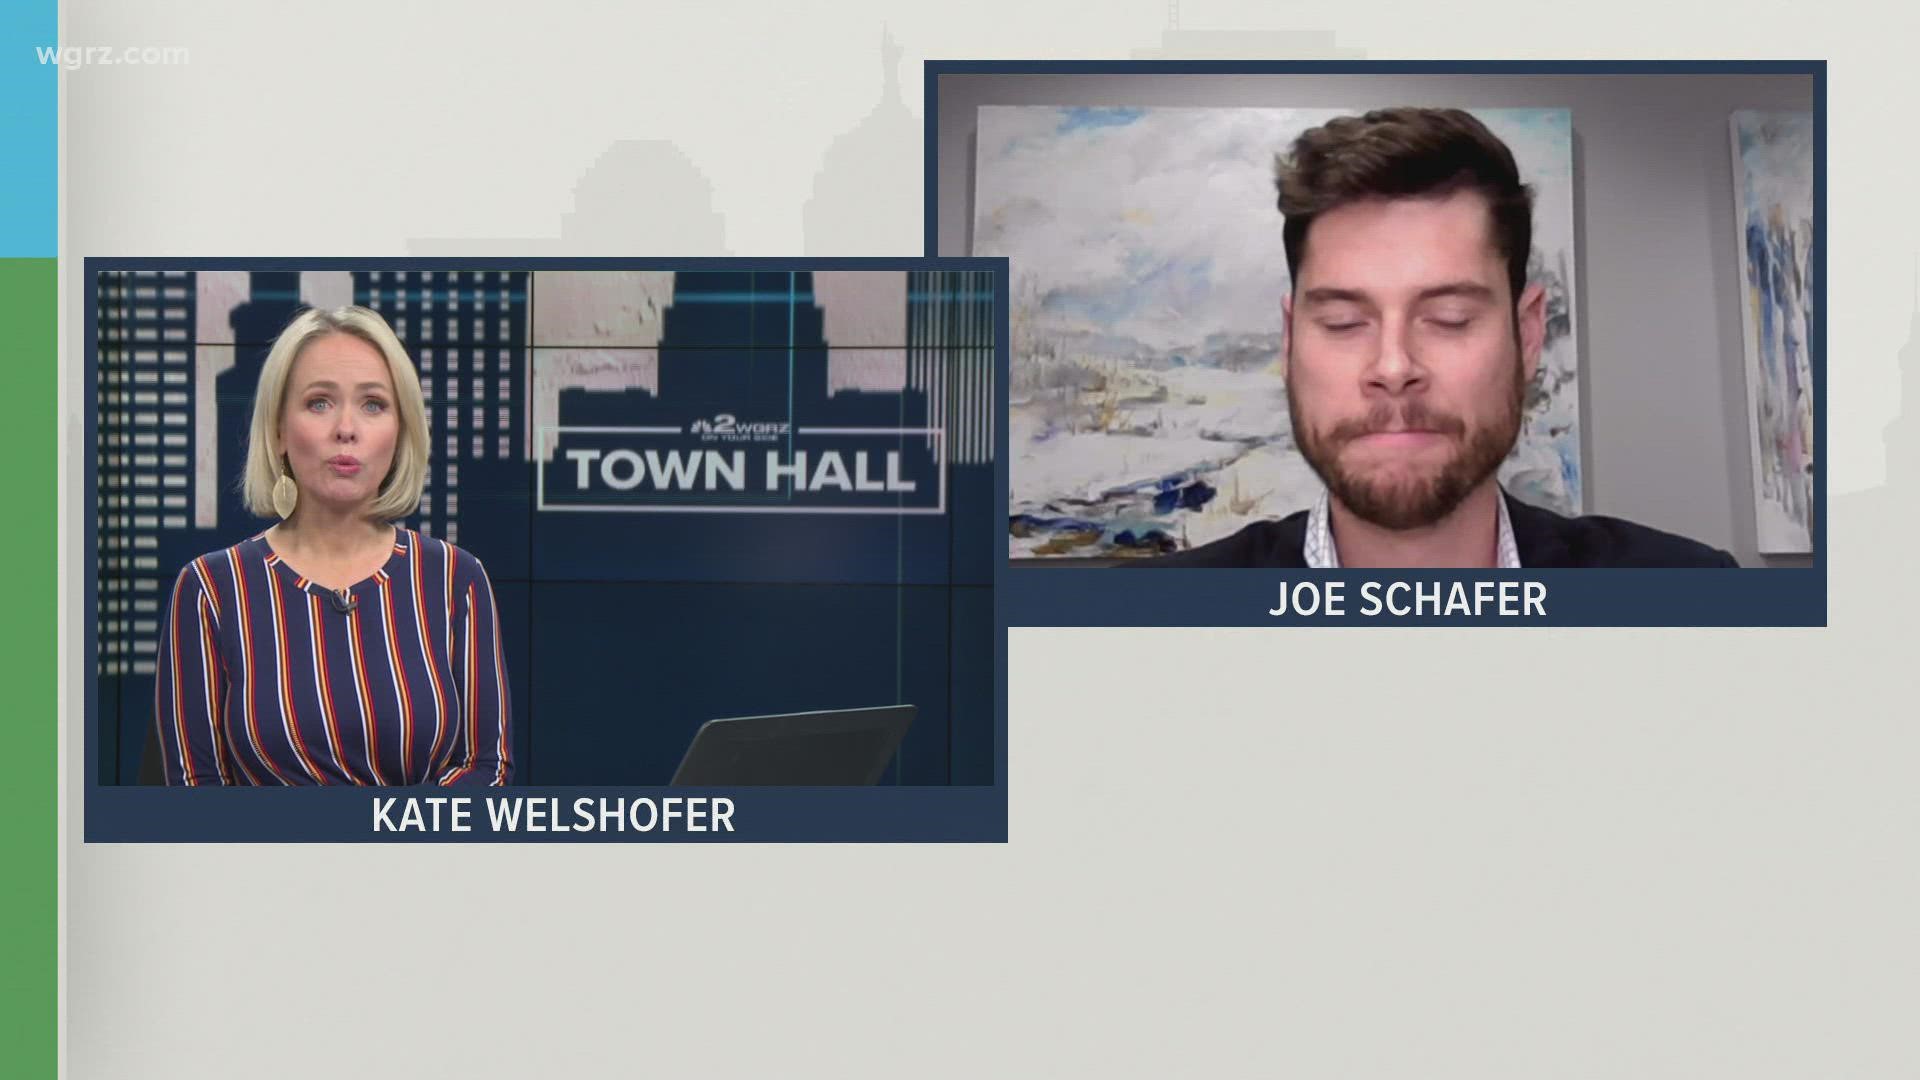 Joe Schafer, an associate attorney with Lippes Mathias, has been following all the developments with the new cannabis law in New York.